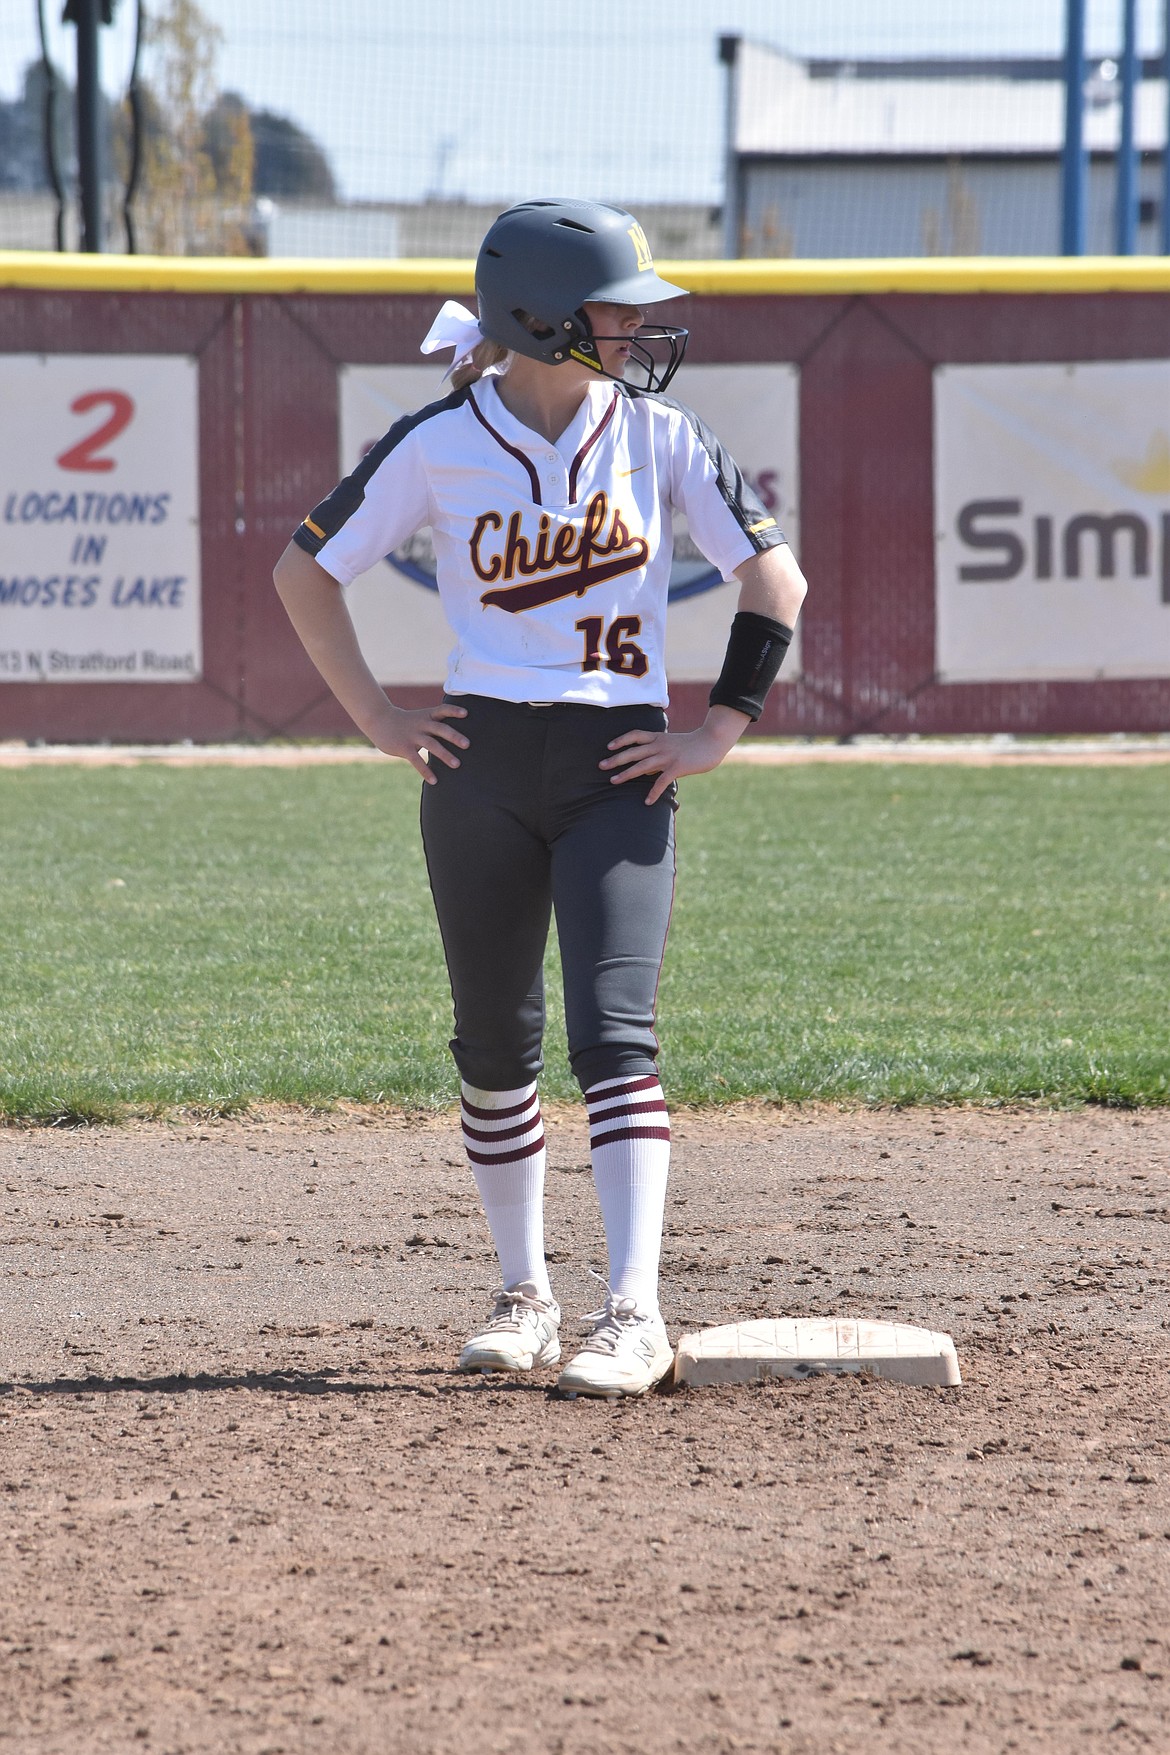 The Moses Lake High School Chiefs fastpitch team is currently 15-3-1 overall and 8-1-1 in the Big 9 Conference, and holds a No. 8 ranking by the Washington Interscholastic Activities Association Rating Percentage Index.